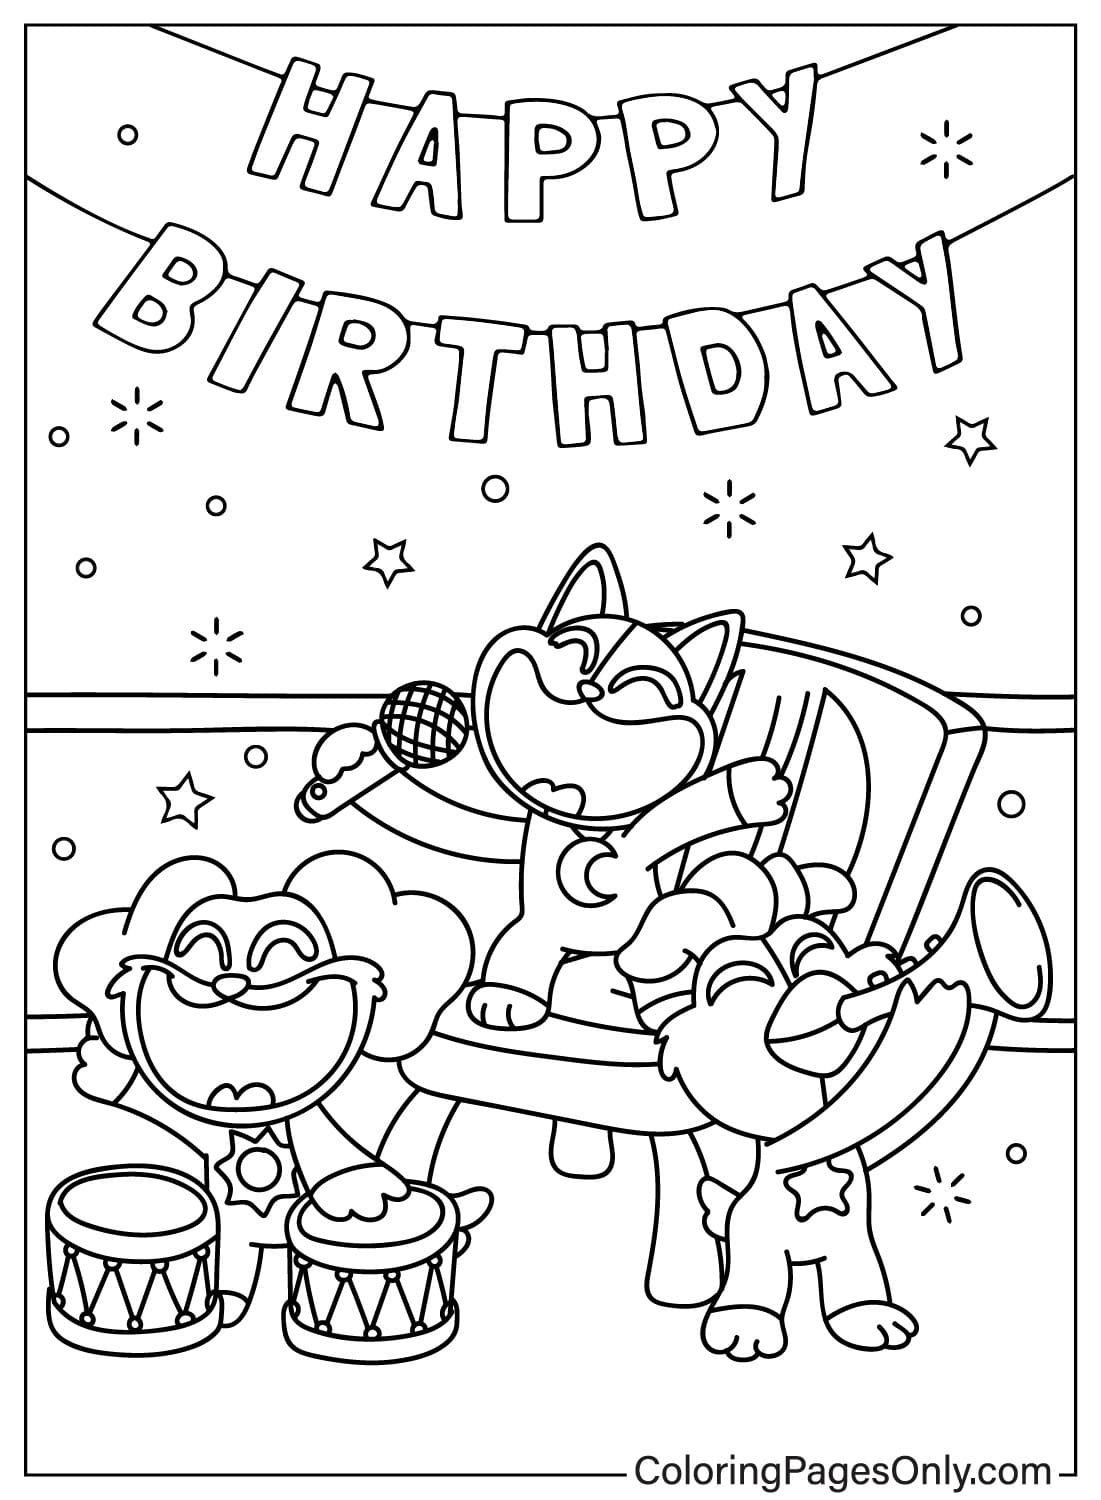 CatNap, DogDay, KickinChicken Coloring Page from CatNap